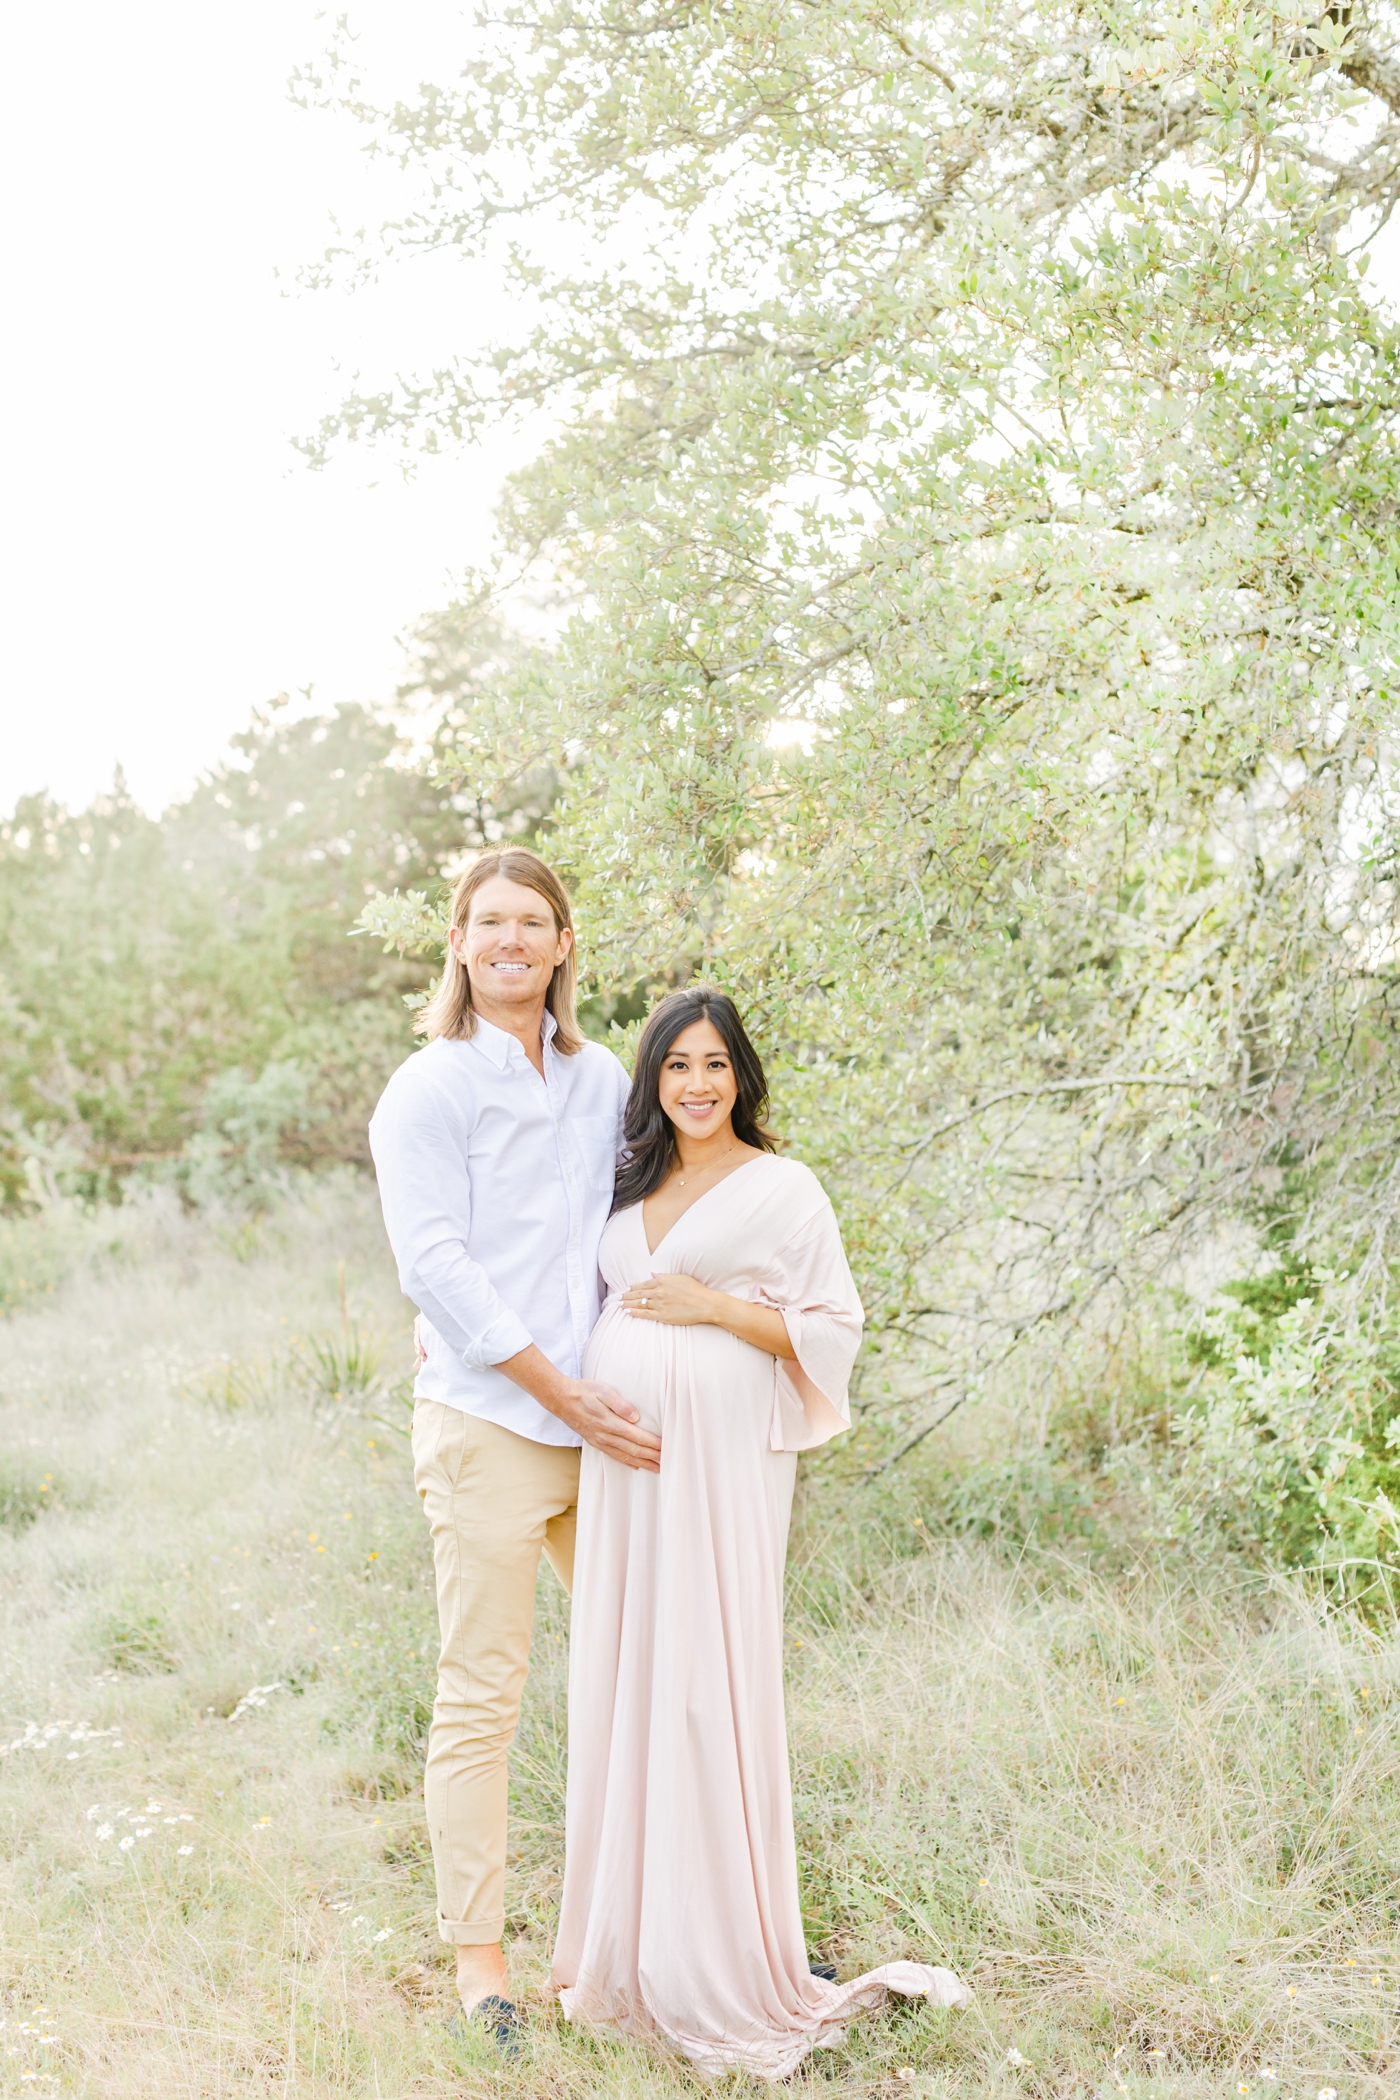 Classic smiling at the camera portrait during maternity photoshoot in Round Rock, TX by Sana Ahmed Photography.